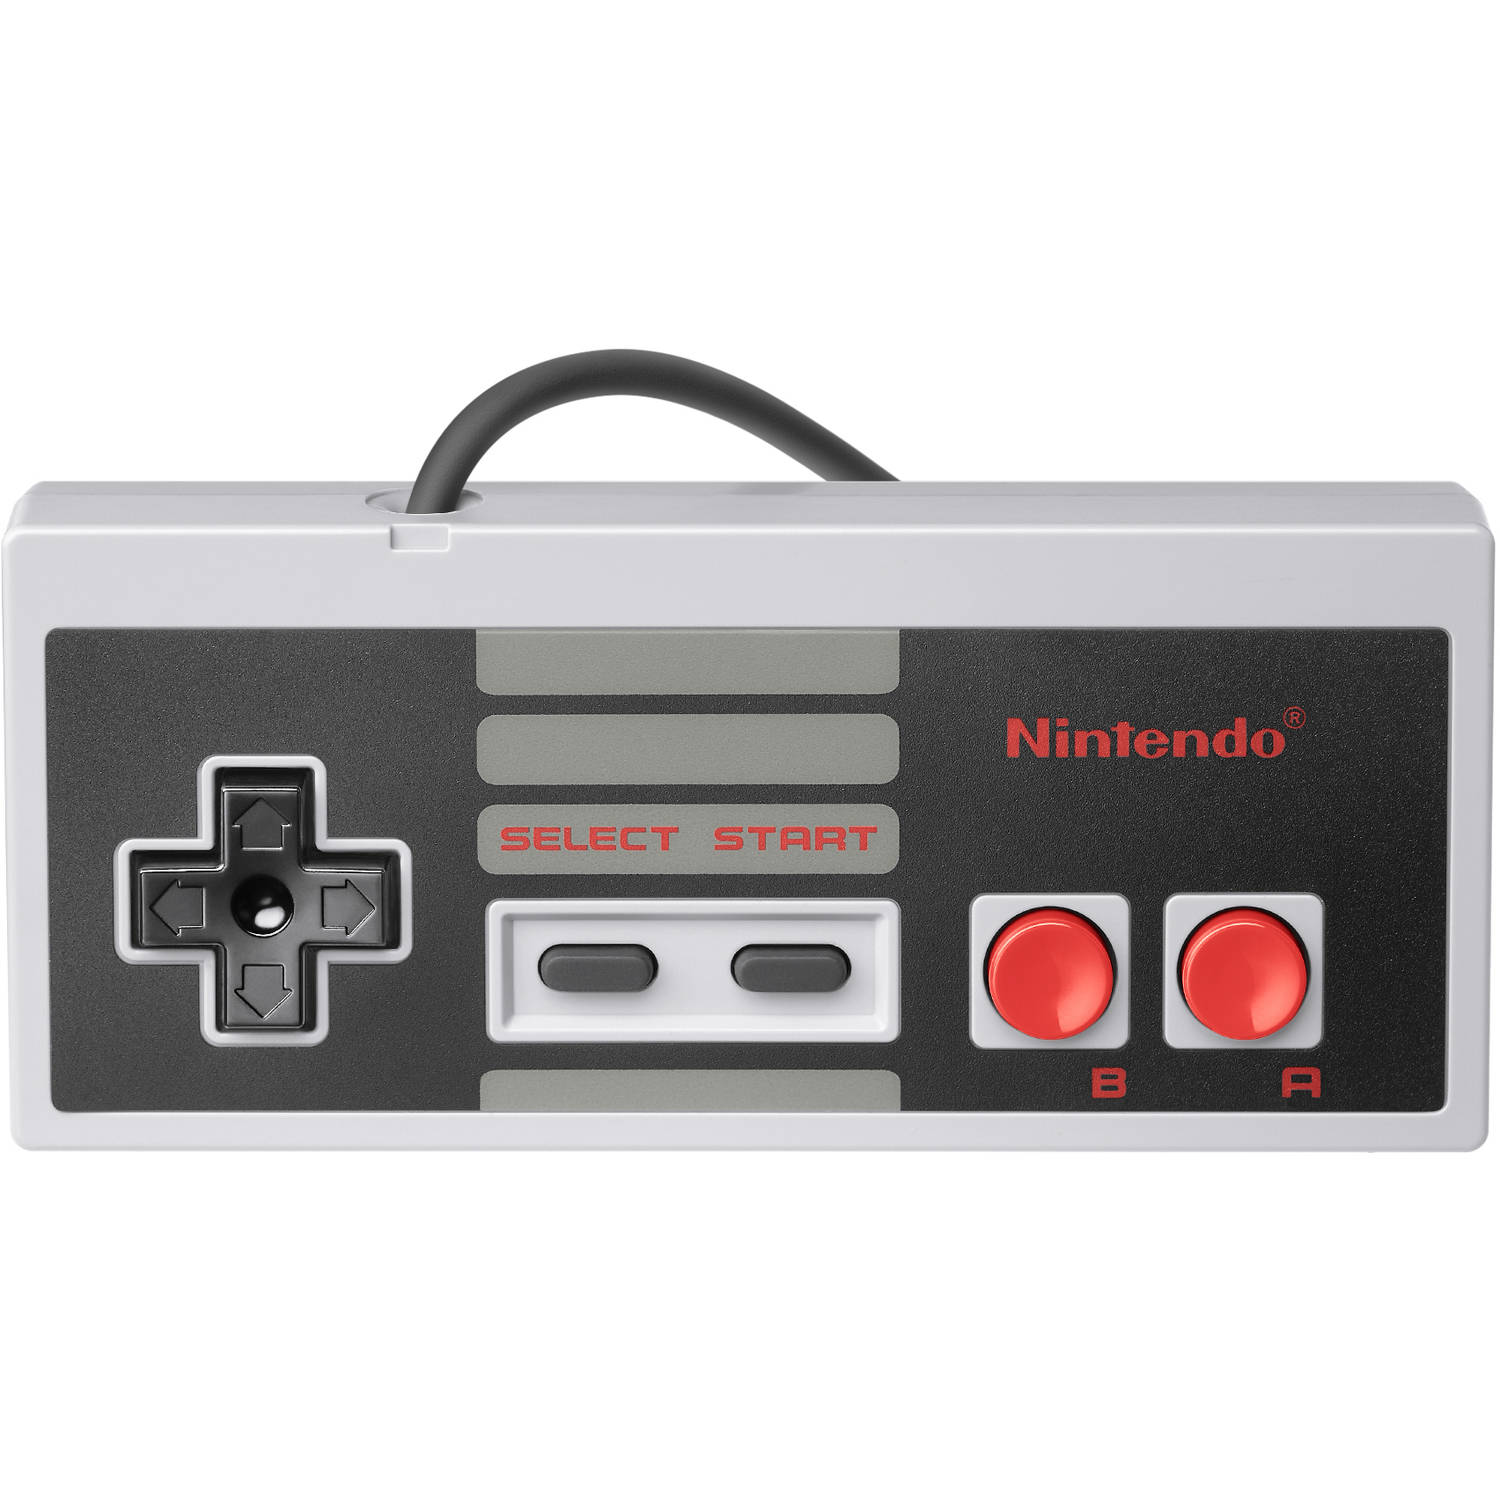 Restored Nintendo Entertainment System NES 1985 Console with Official OEM Controller (Refurbished) - image 4 of 4